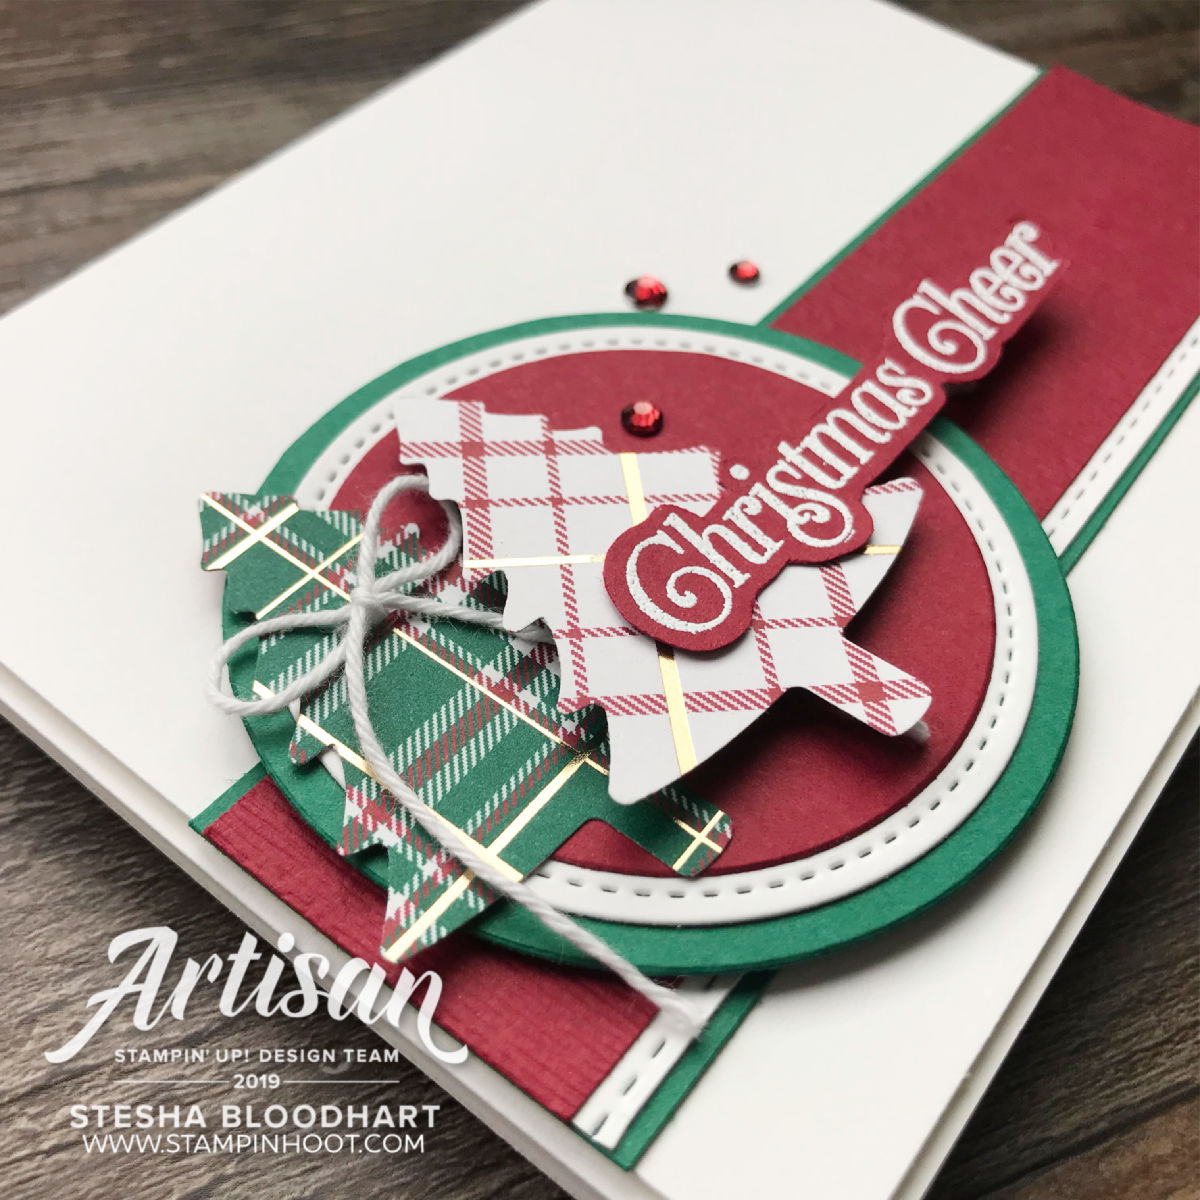 Perfectly Plaid Bundle by Stampin' Up! Christmas Card by Stesha Bloodhart, Stampin' Hoot!